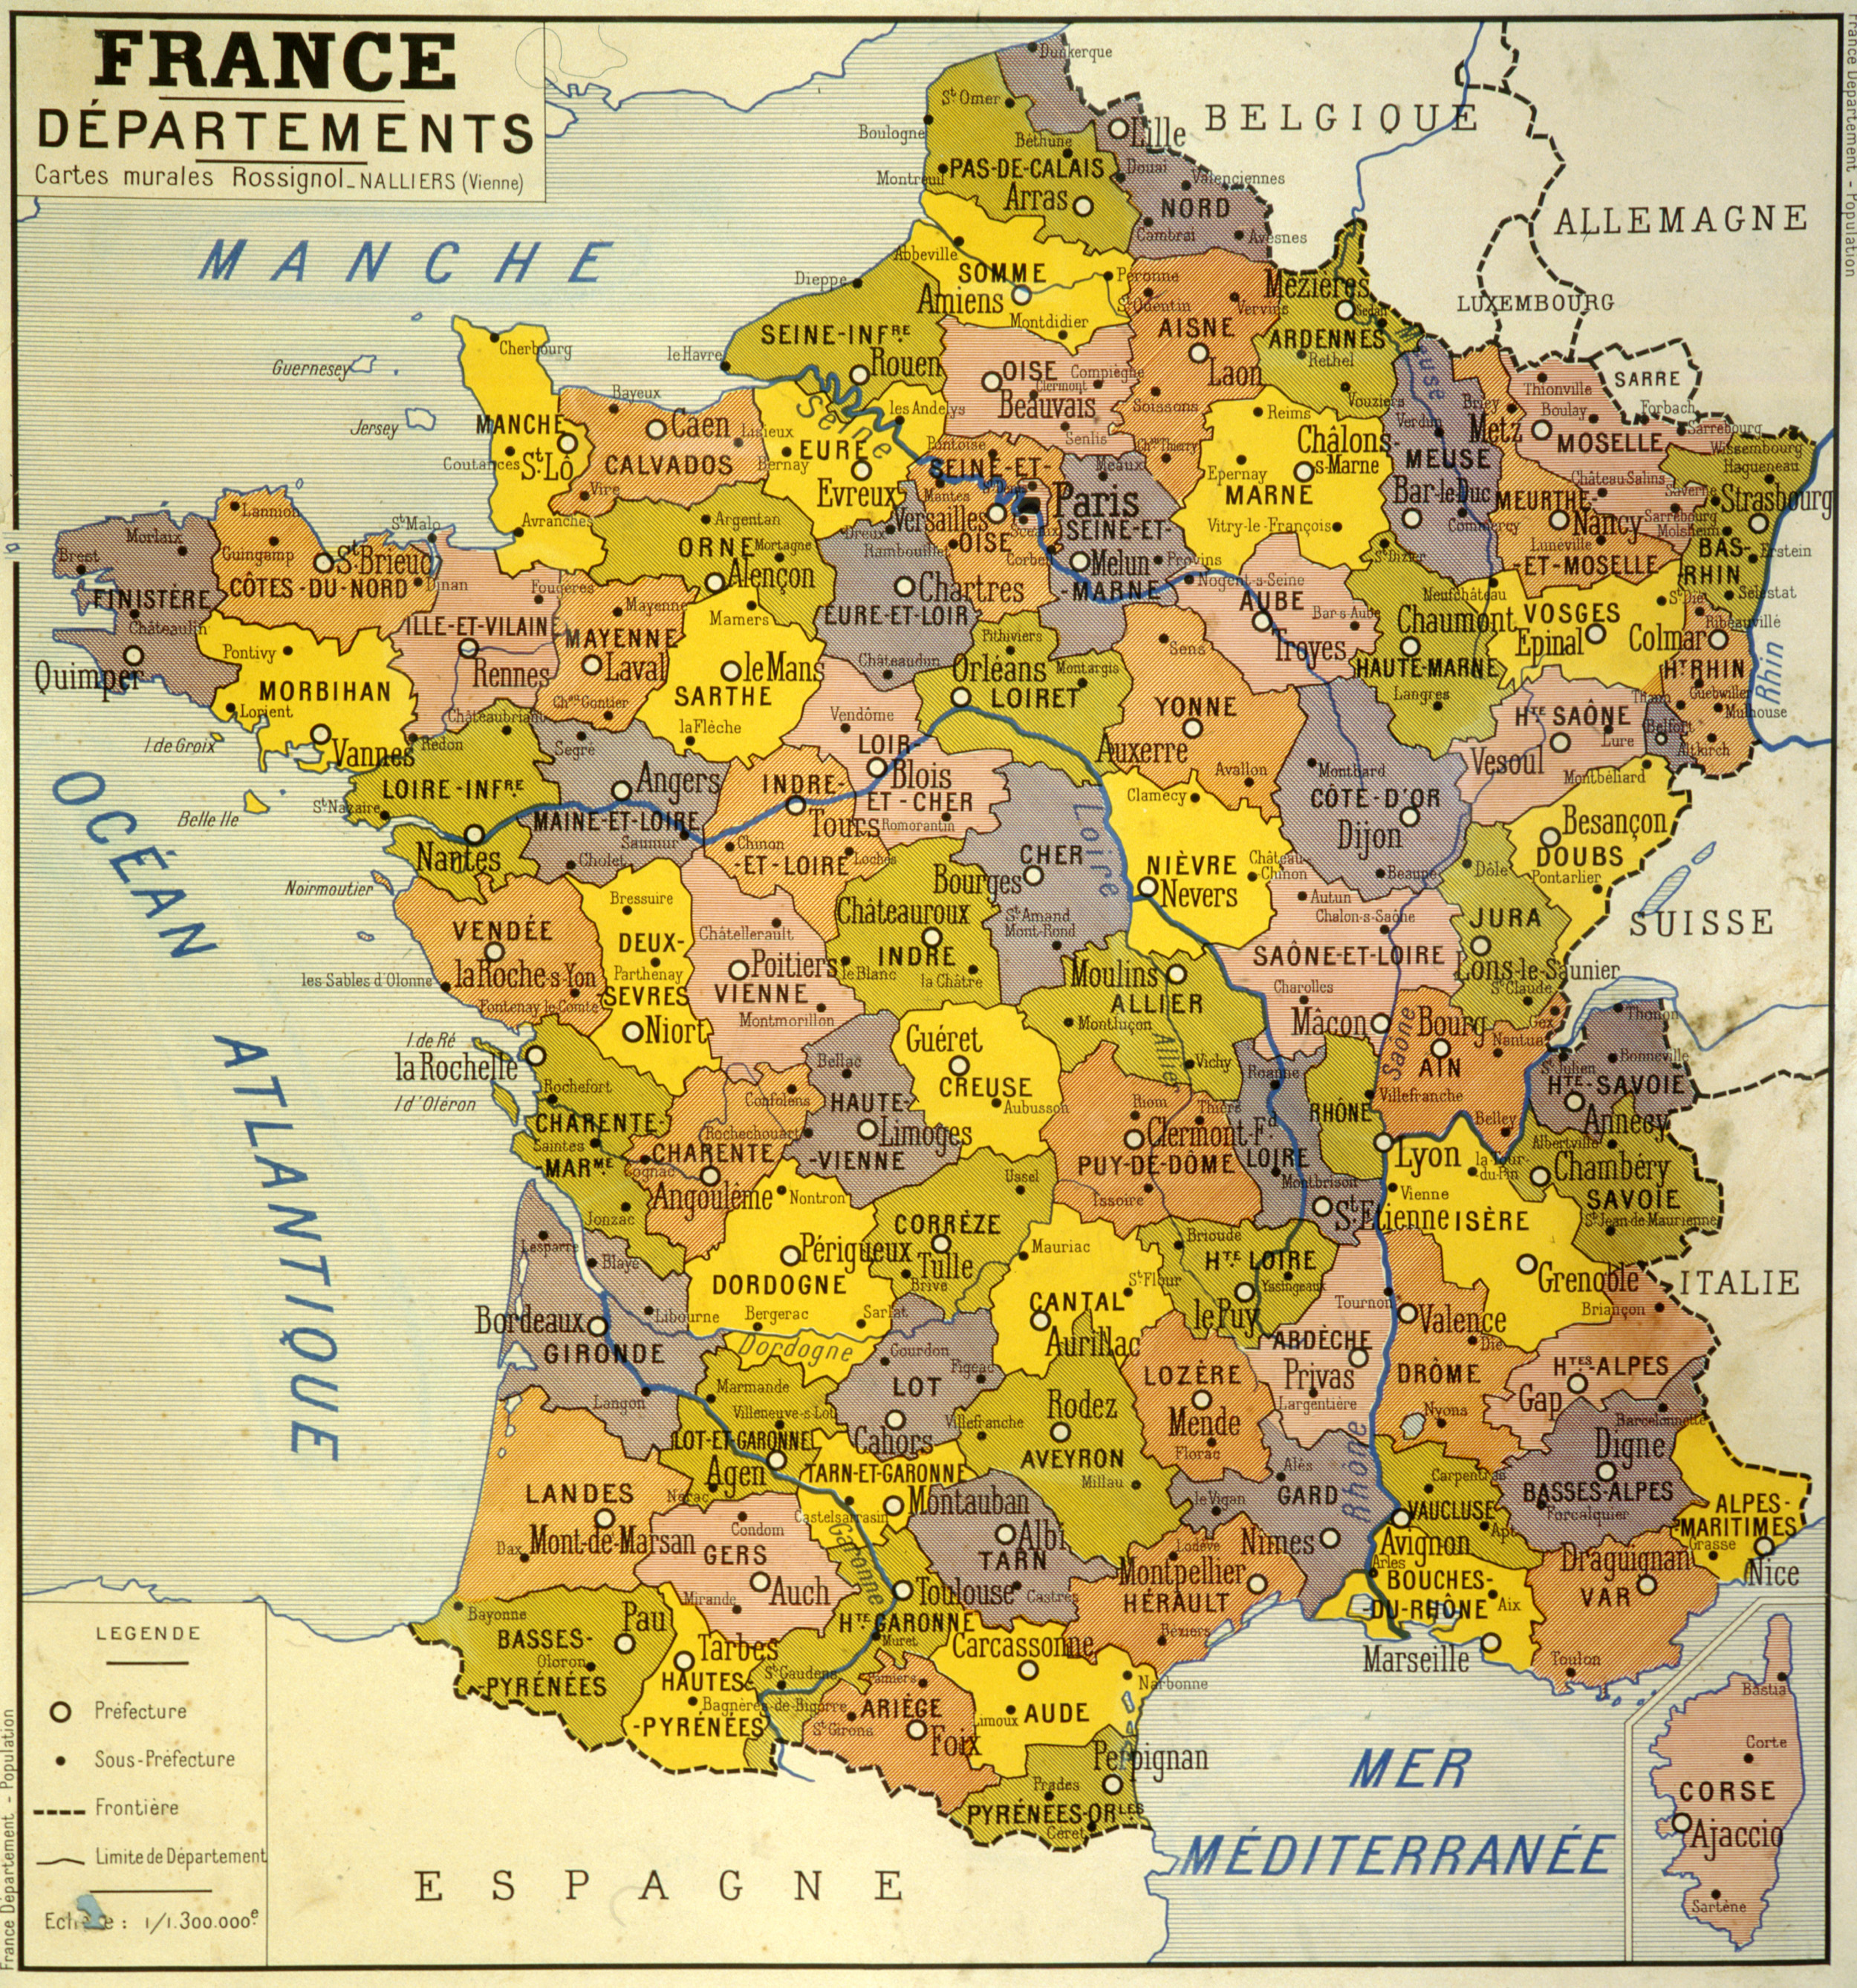 File:Carte France geo dep.png — Wikimedia Commons